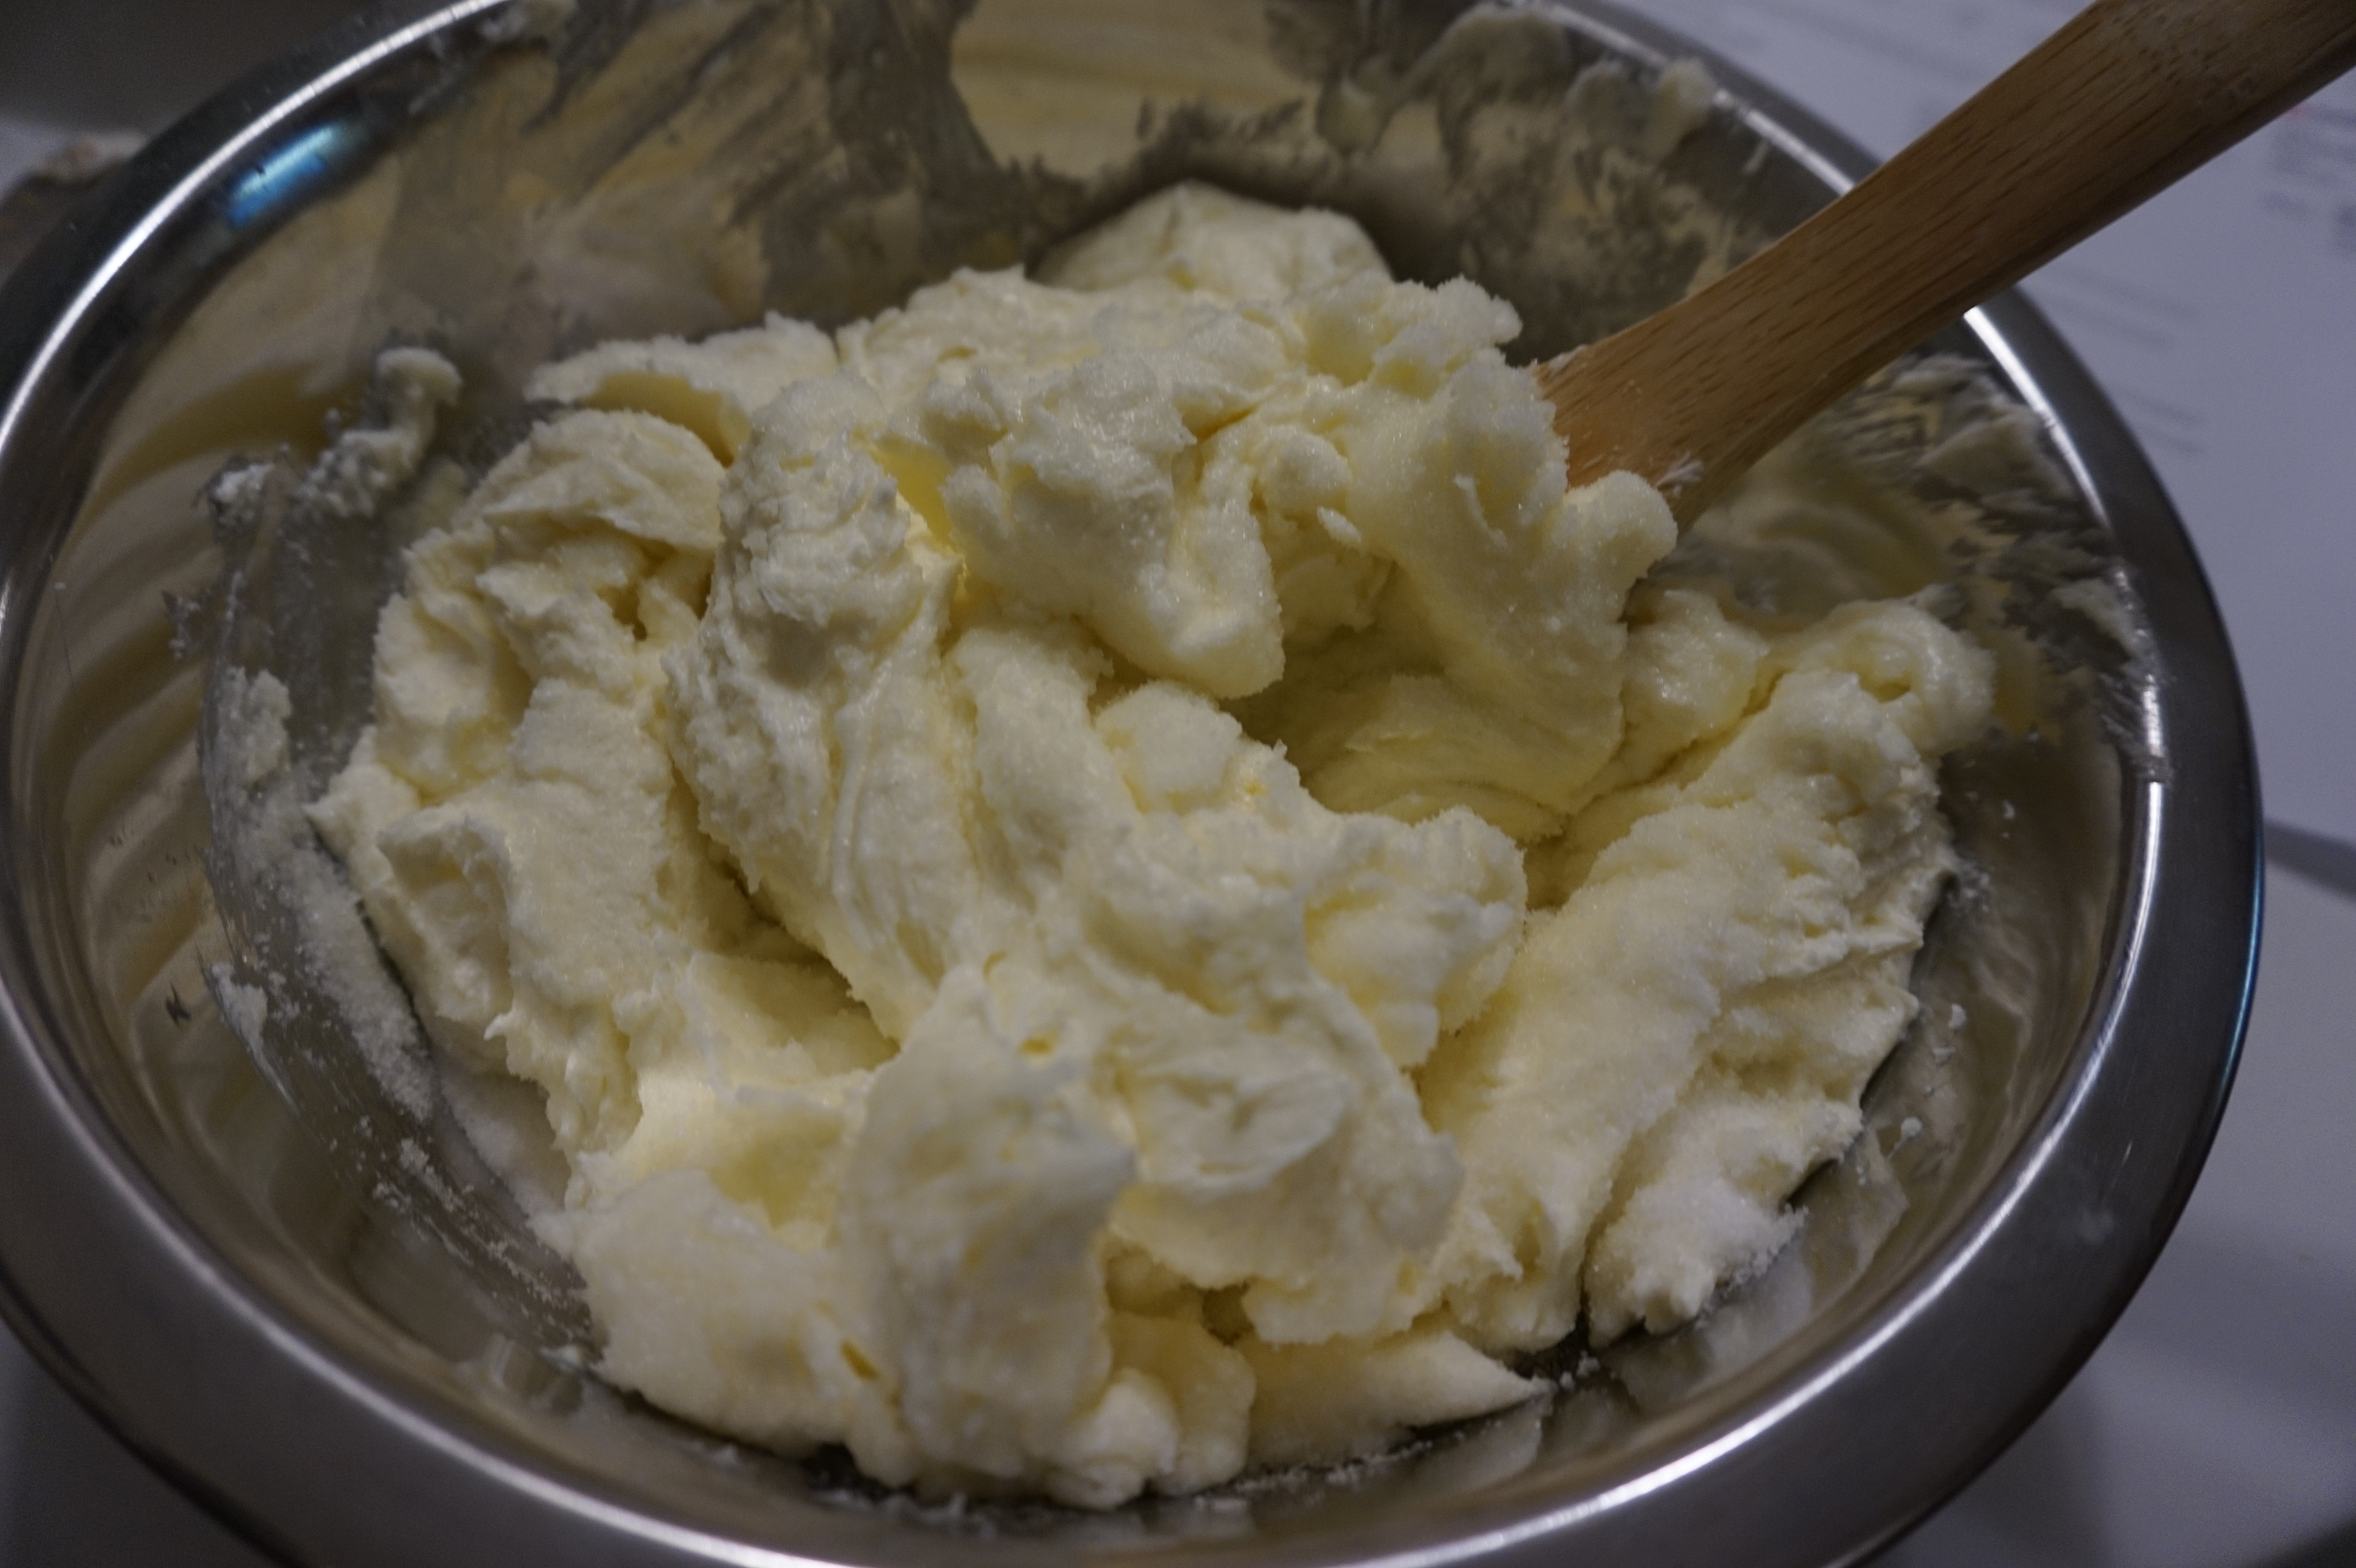 Mixing the cream cheese and sugar 